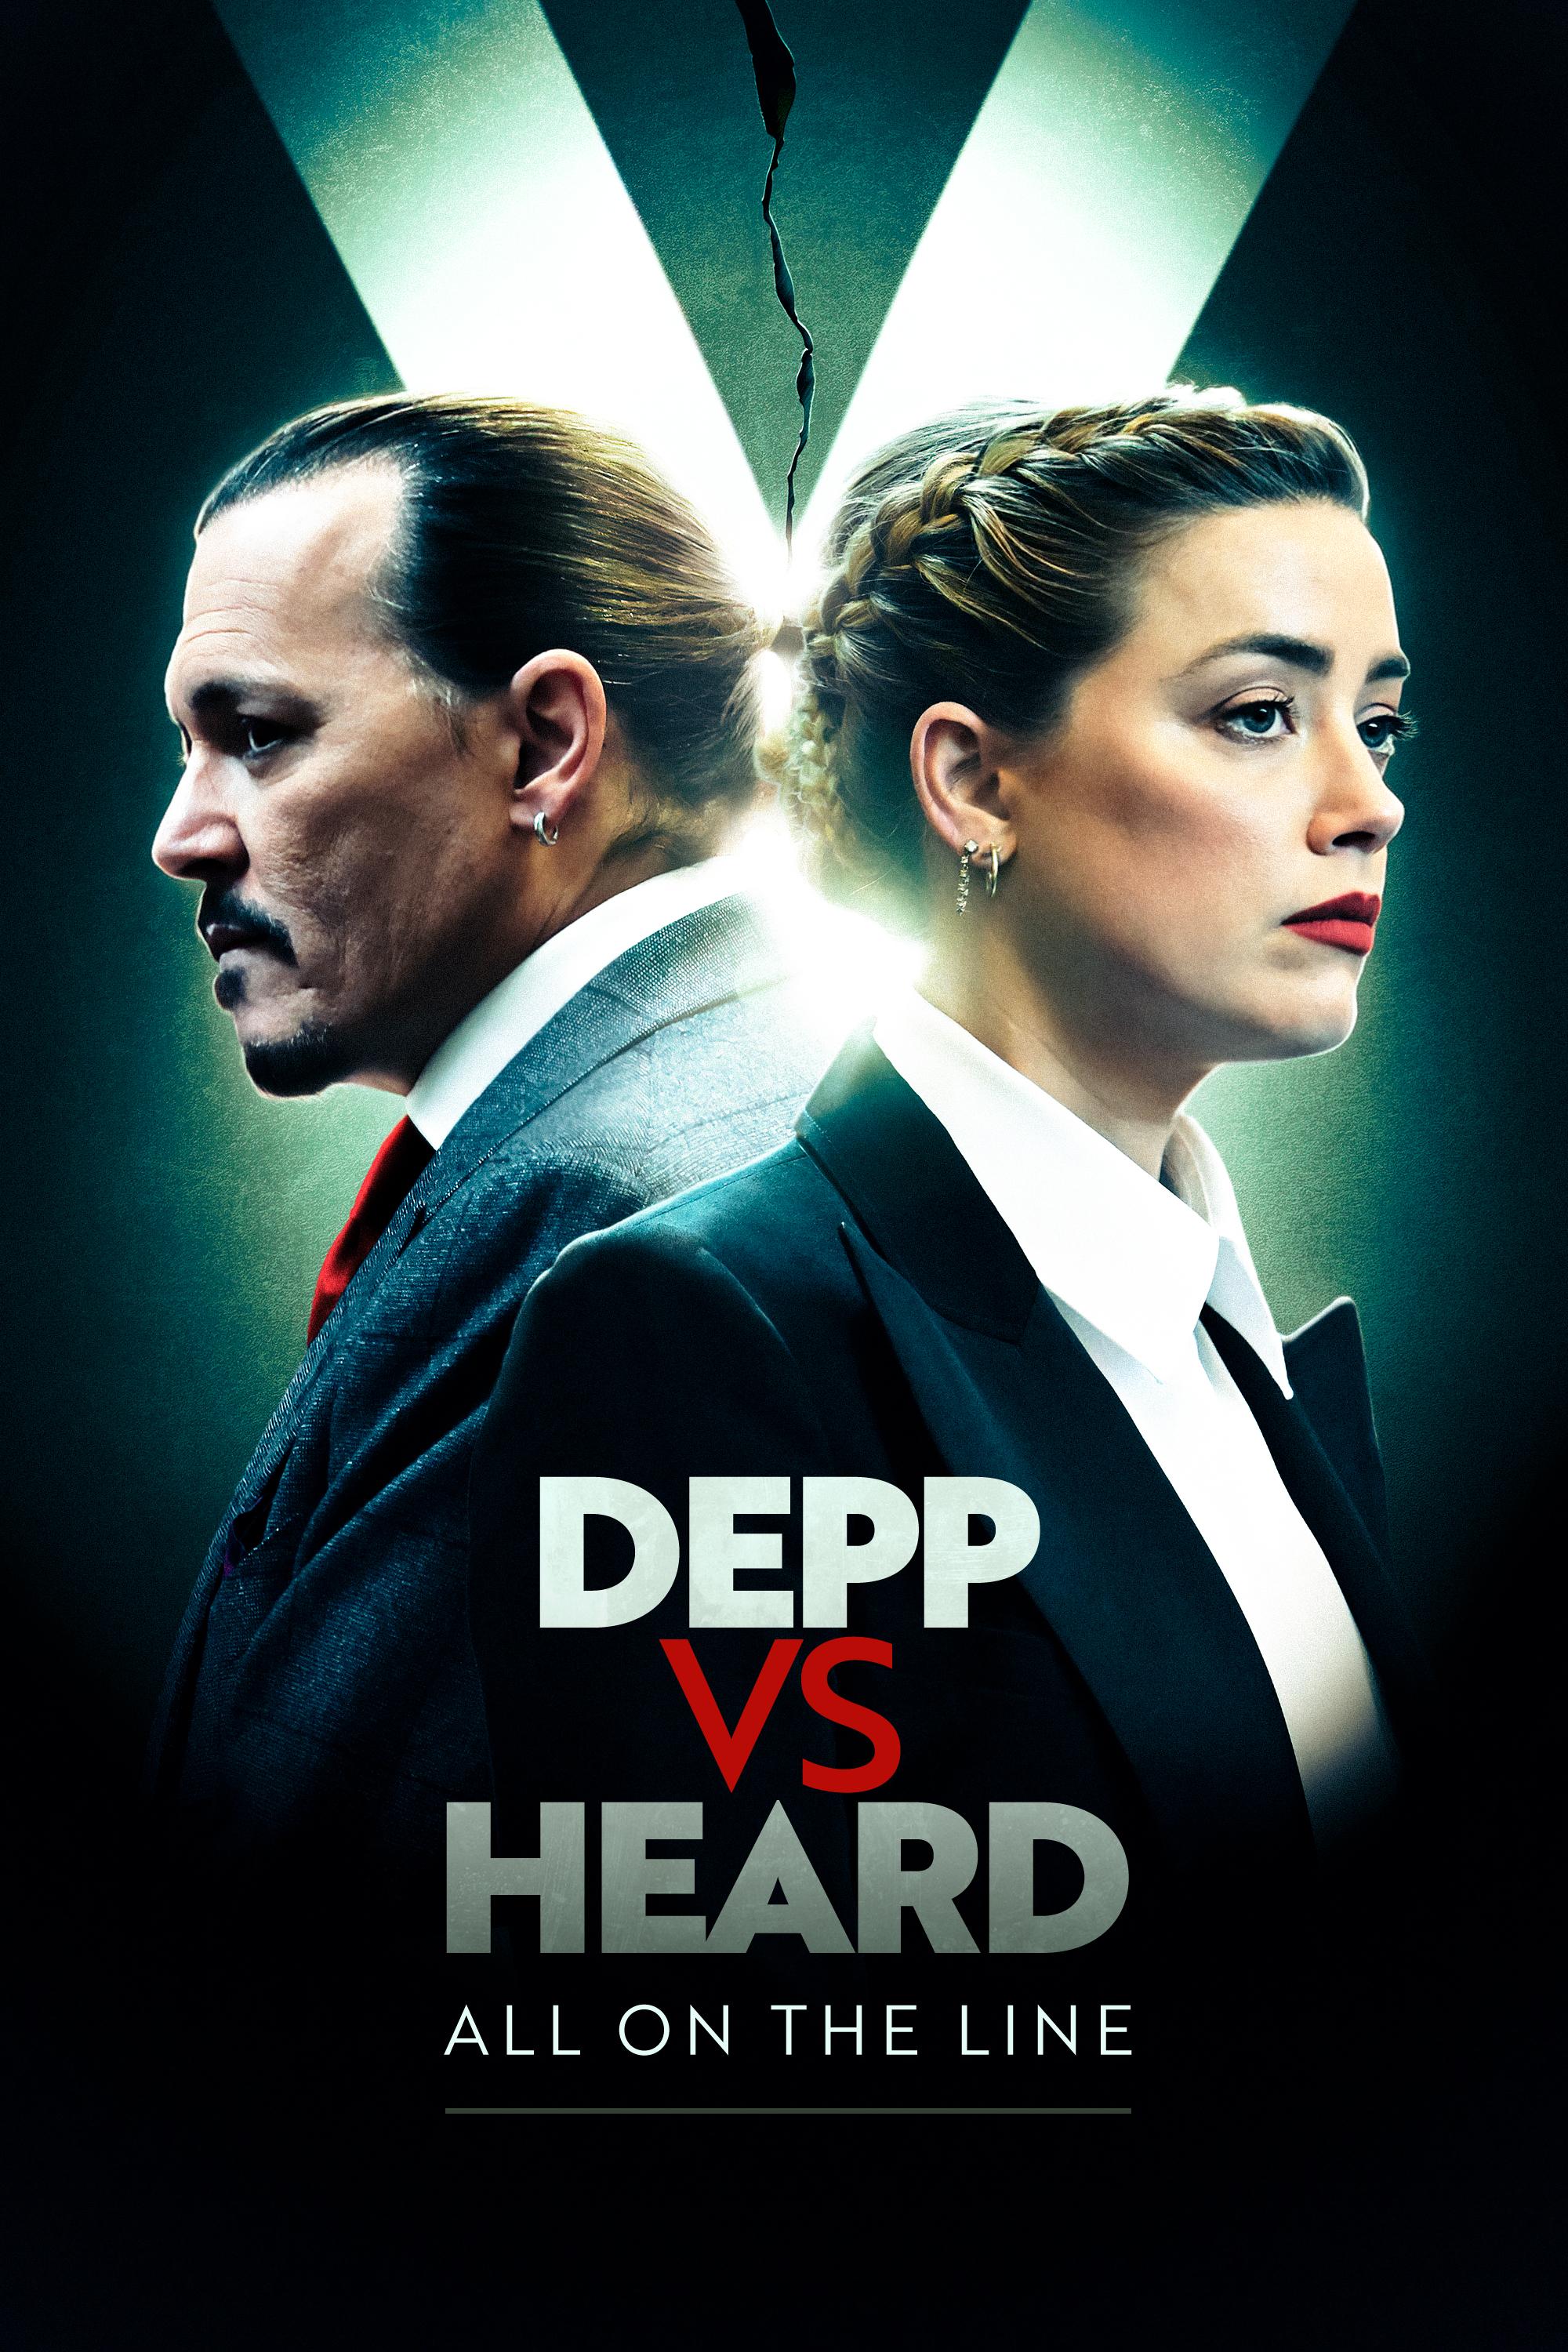 This intriguing series endeavors to offer a balanced perspective on the sensational legal proceedings that involved renowned celebrities Johnny Depp and Amber Heard.